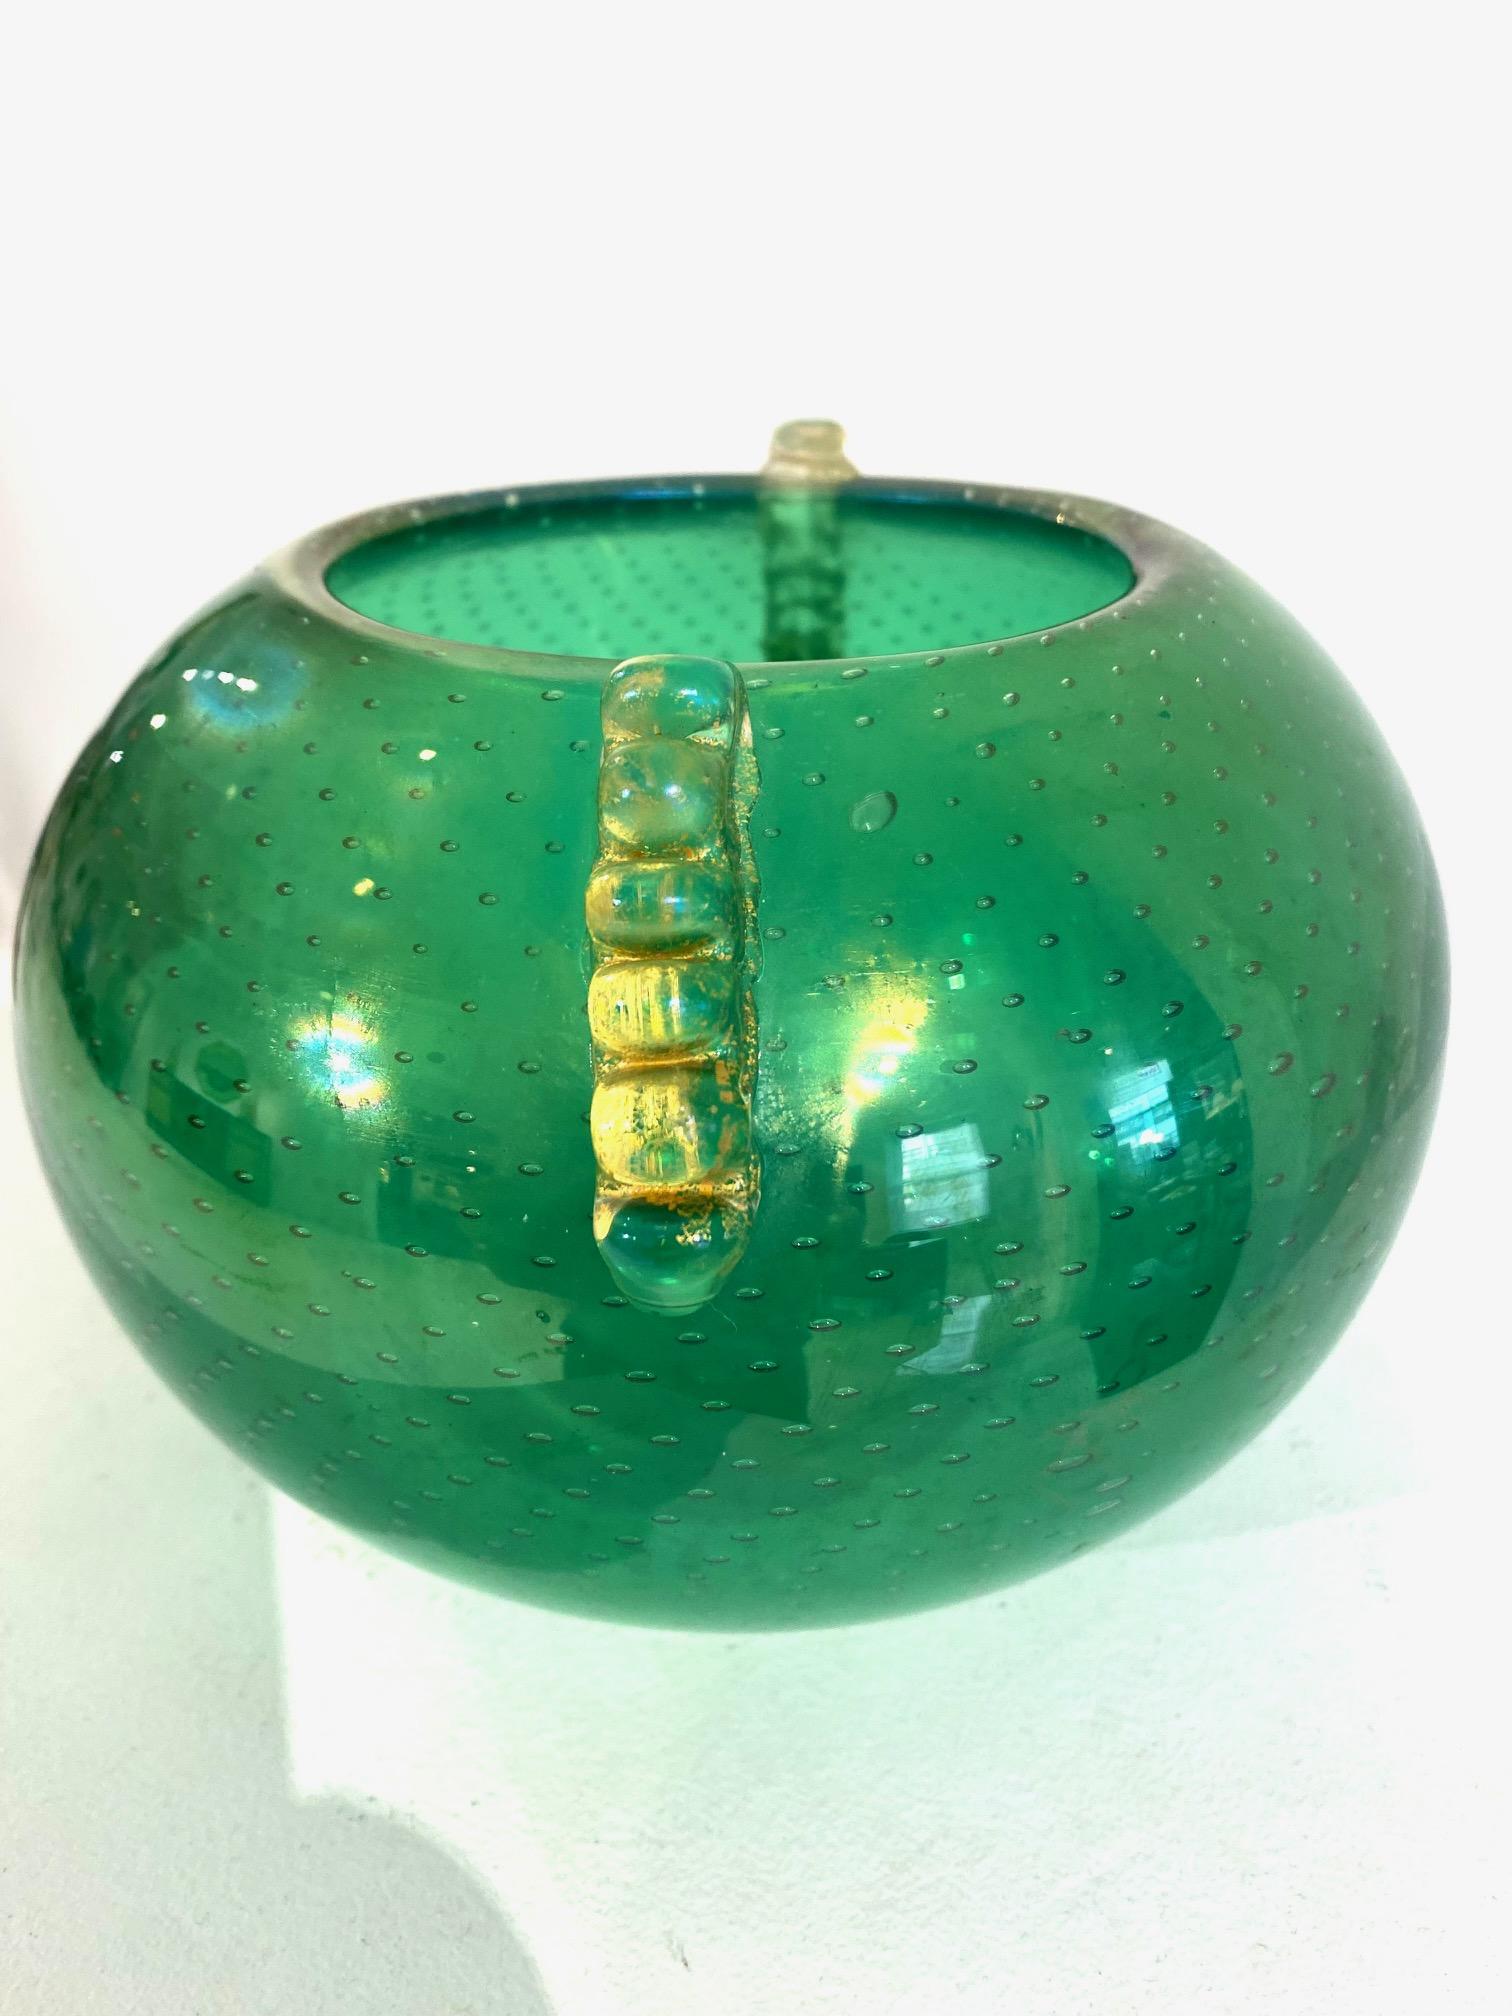 Green Bulicante Glass Vase by Barovier e Toso In Good Condition For Sale In Montreal, QC